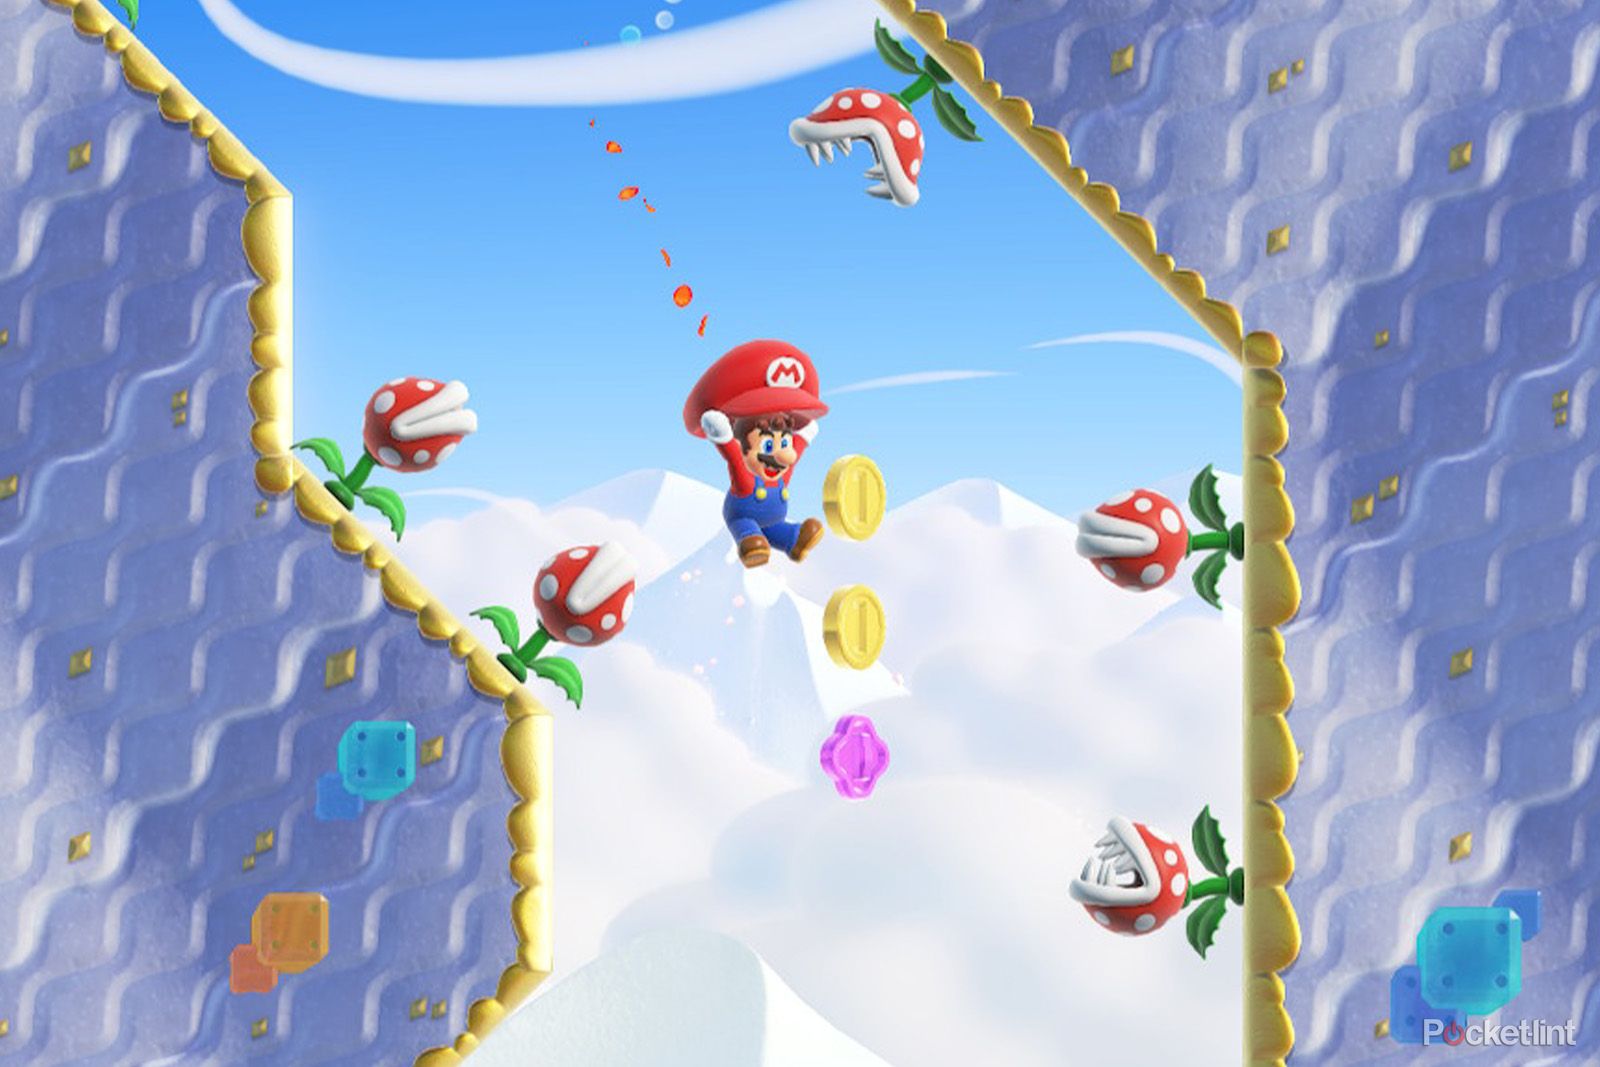 Super Mario Bros. Wonder review: Fizzing with ideas